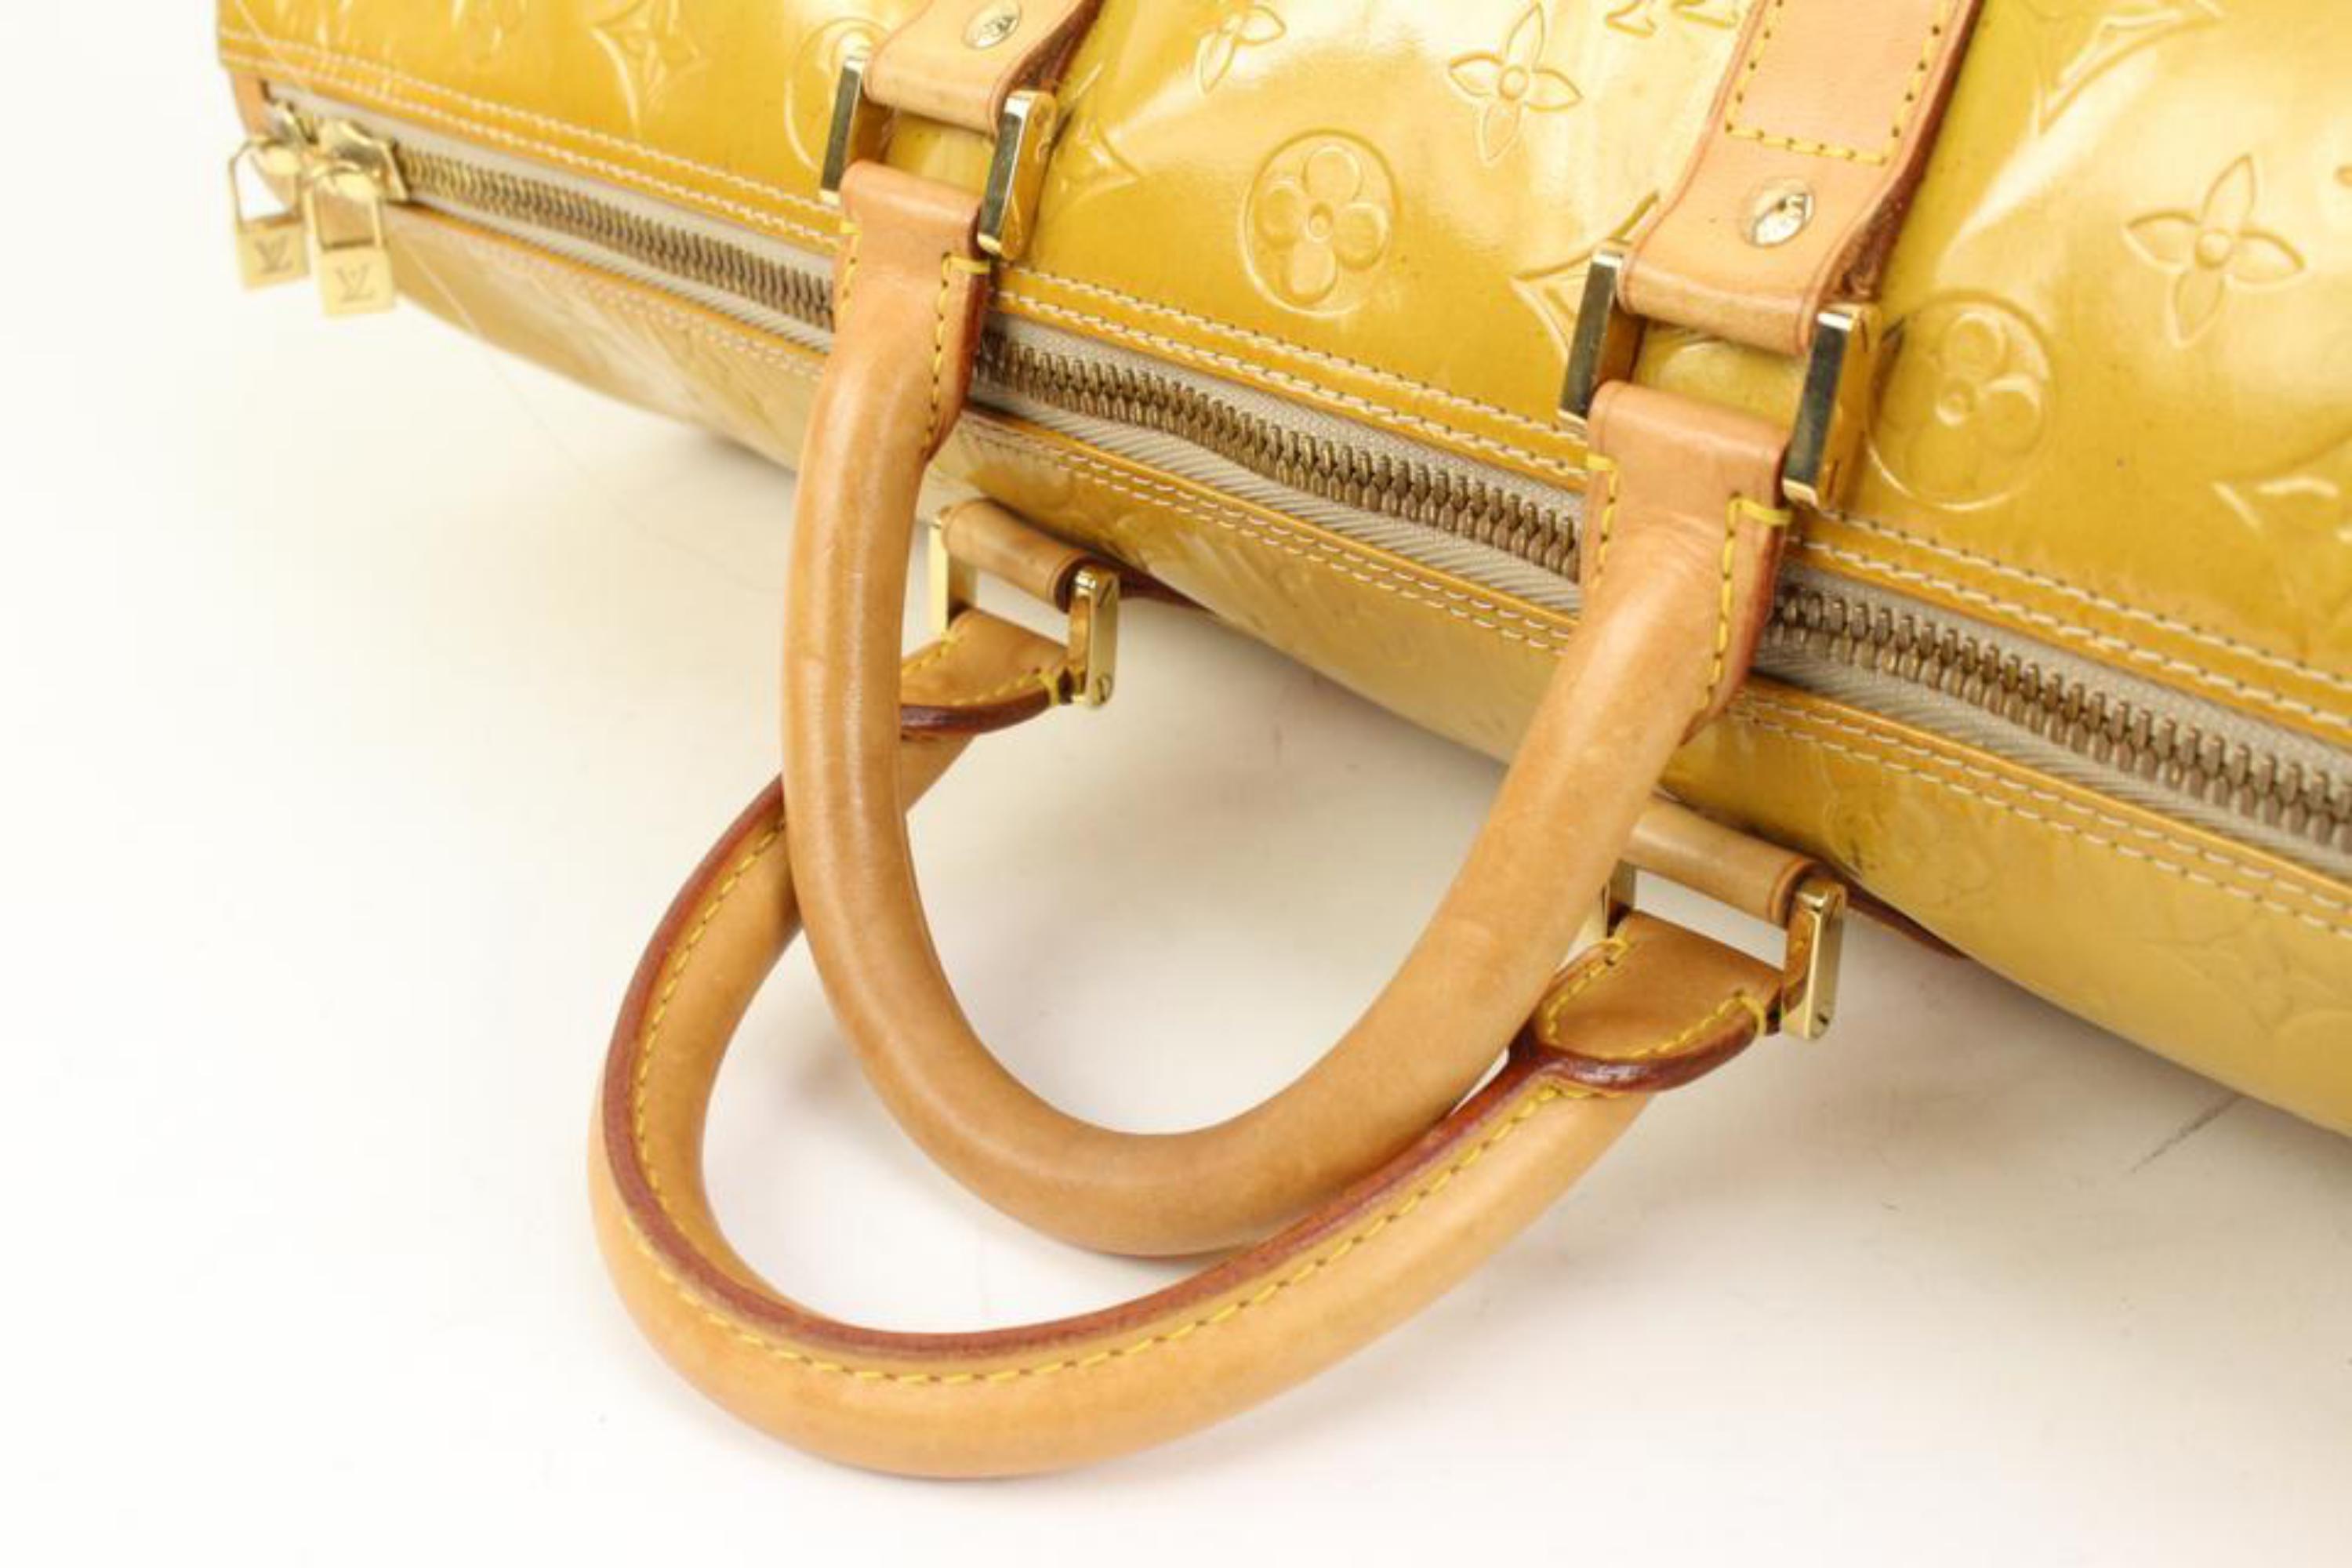 Louis Vuitton Yellow Monogram Vernis Mercer Keepall Duffle Bag 88lv317s In Good Condition For Sale In Dix hills, NY